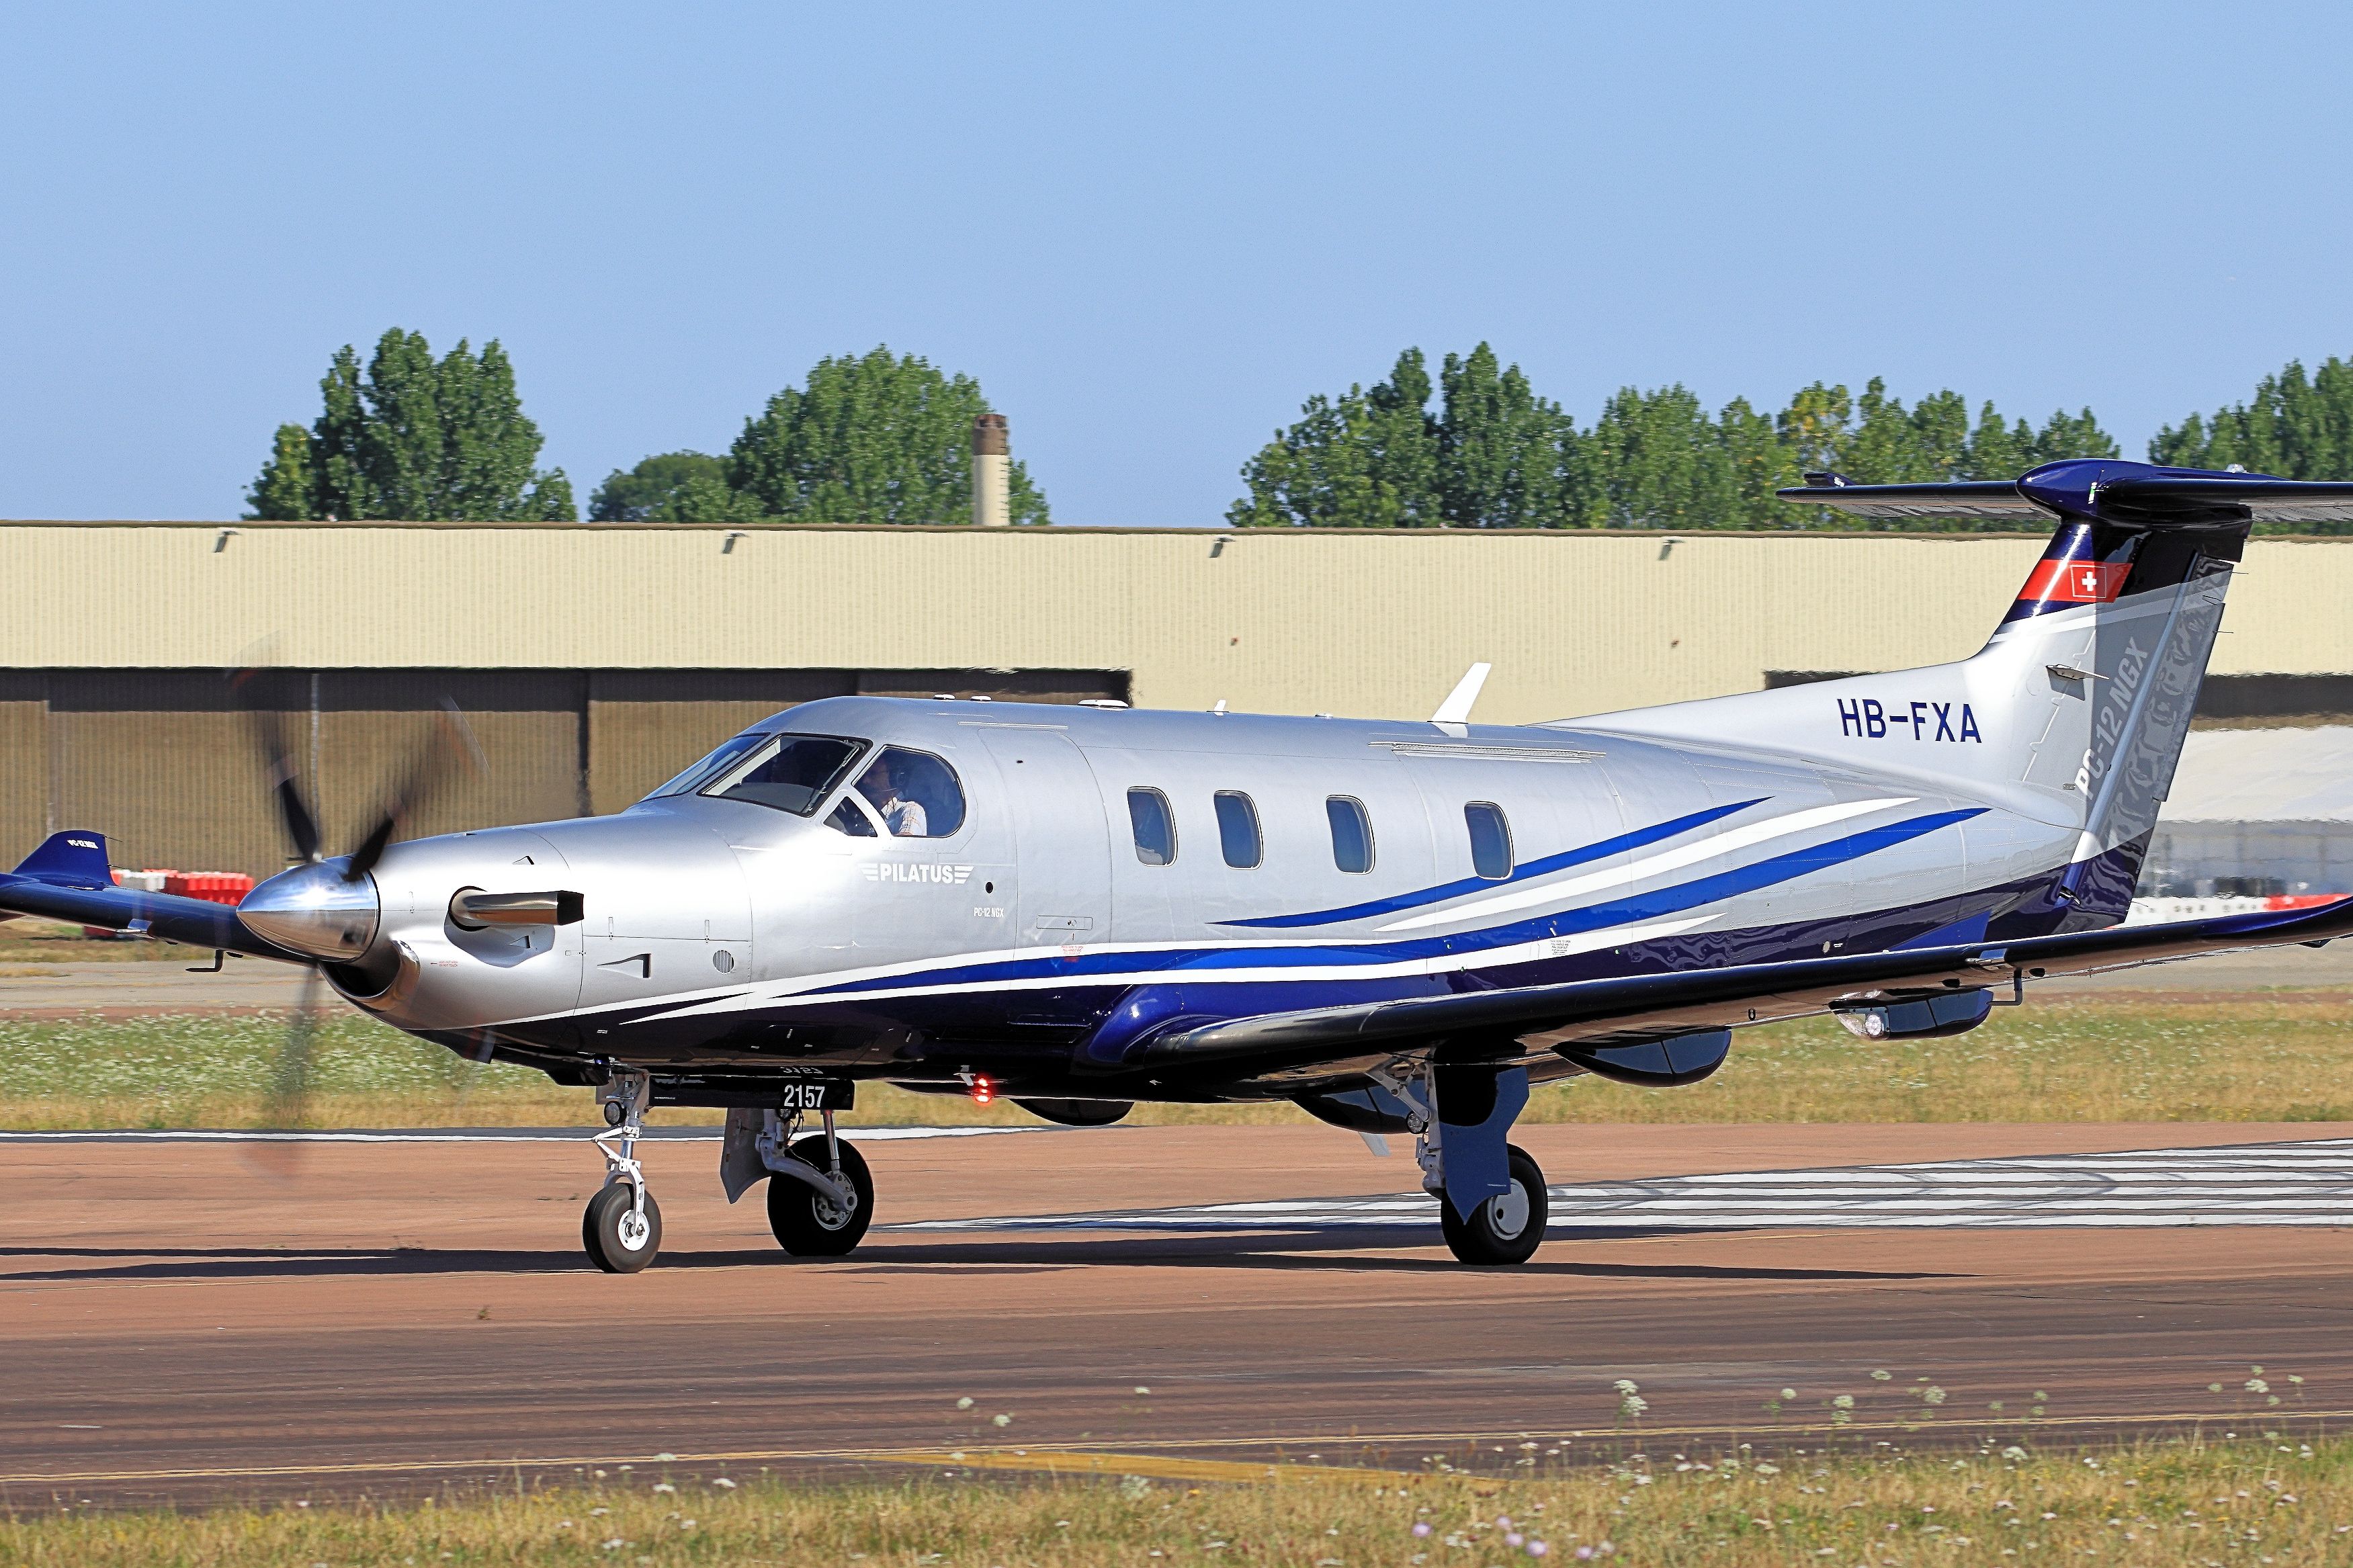 Pilatus PC-12NGX taxiing to the highway.